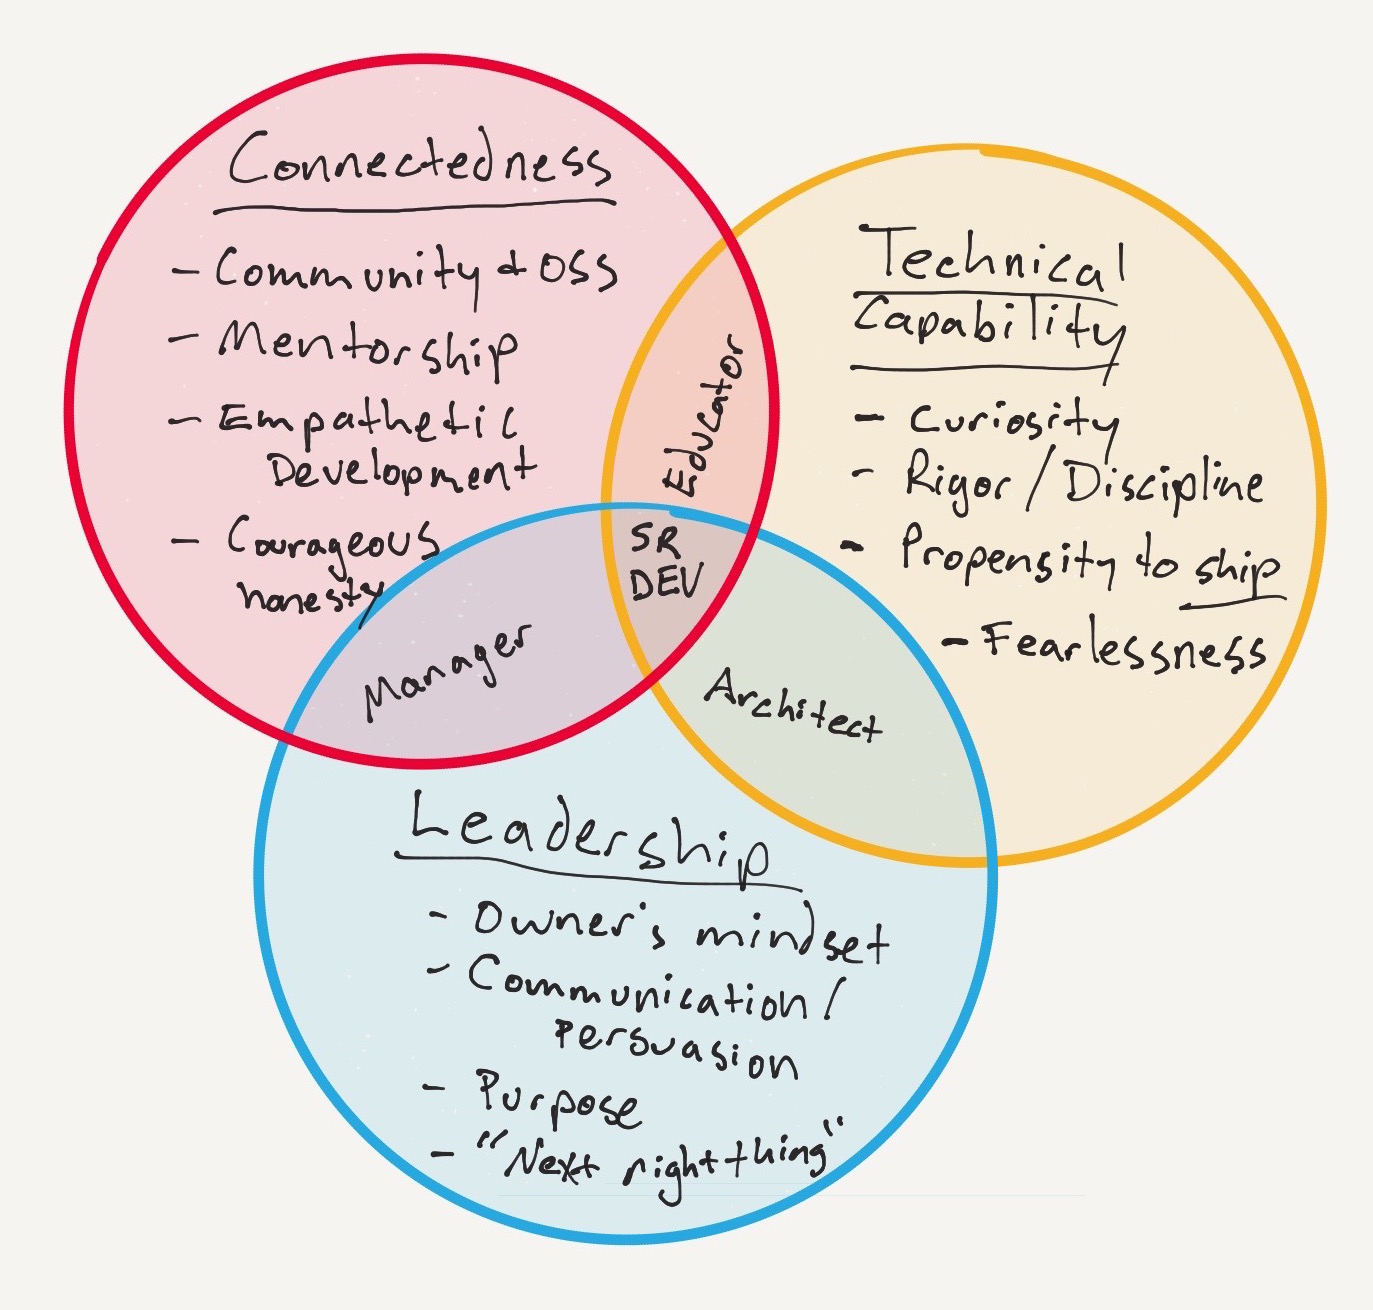 Venn diagram relating Connectendess, Technical Capability, and Leadership